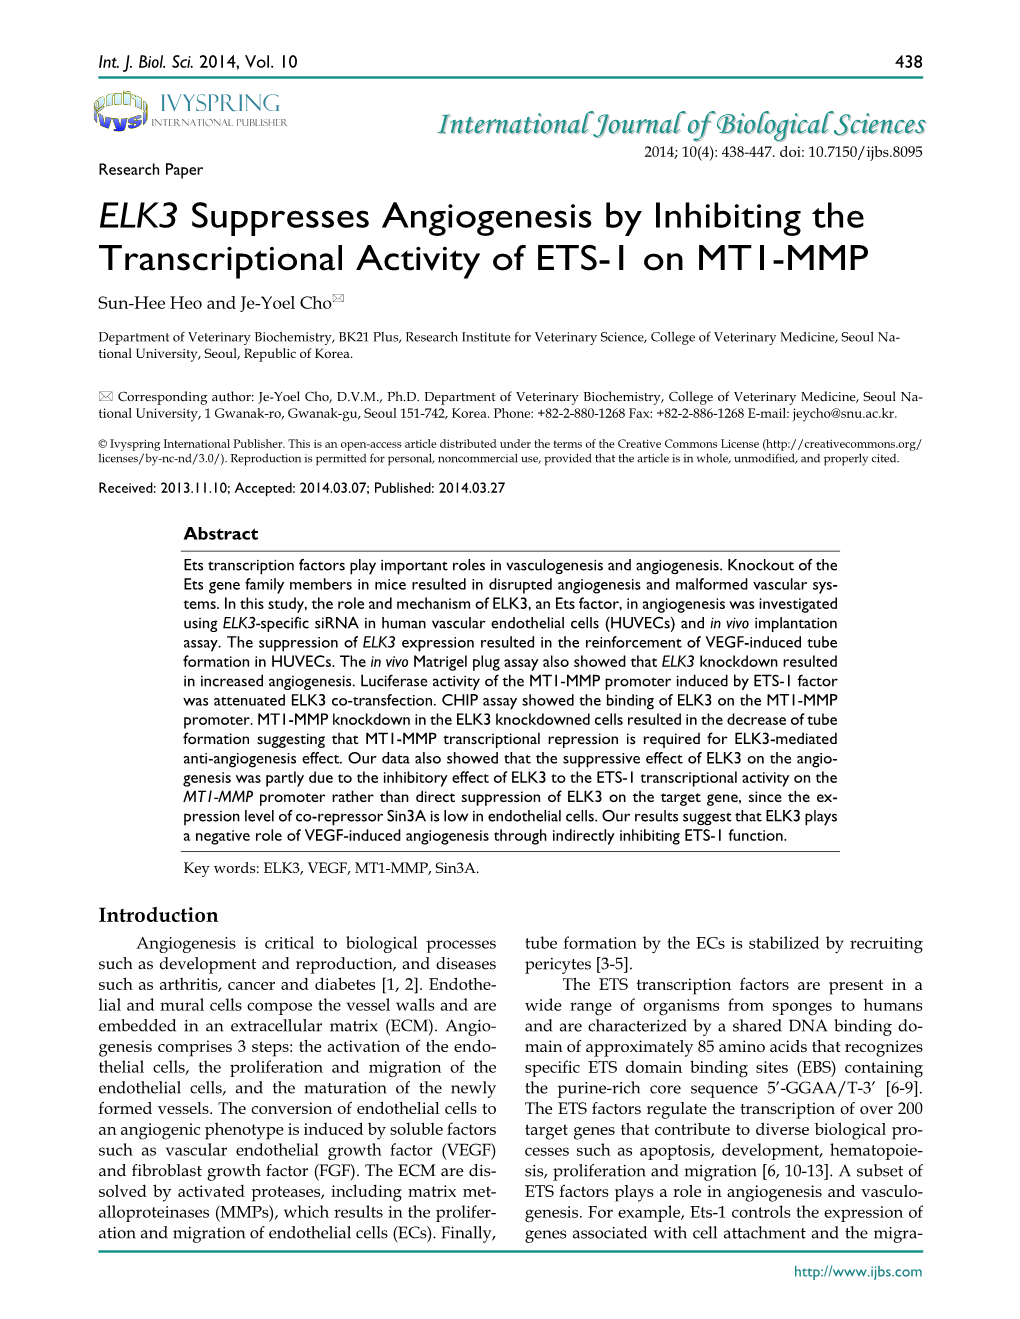 ELK3 Suppresses Angiogenesis by Inhibiting the Transcriptional Activity of ETS-1 on MT1-MMP Sun-Hee Heo and Je-Yoel Cho